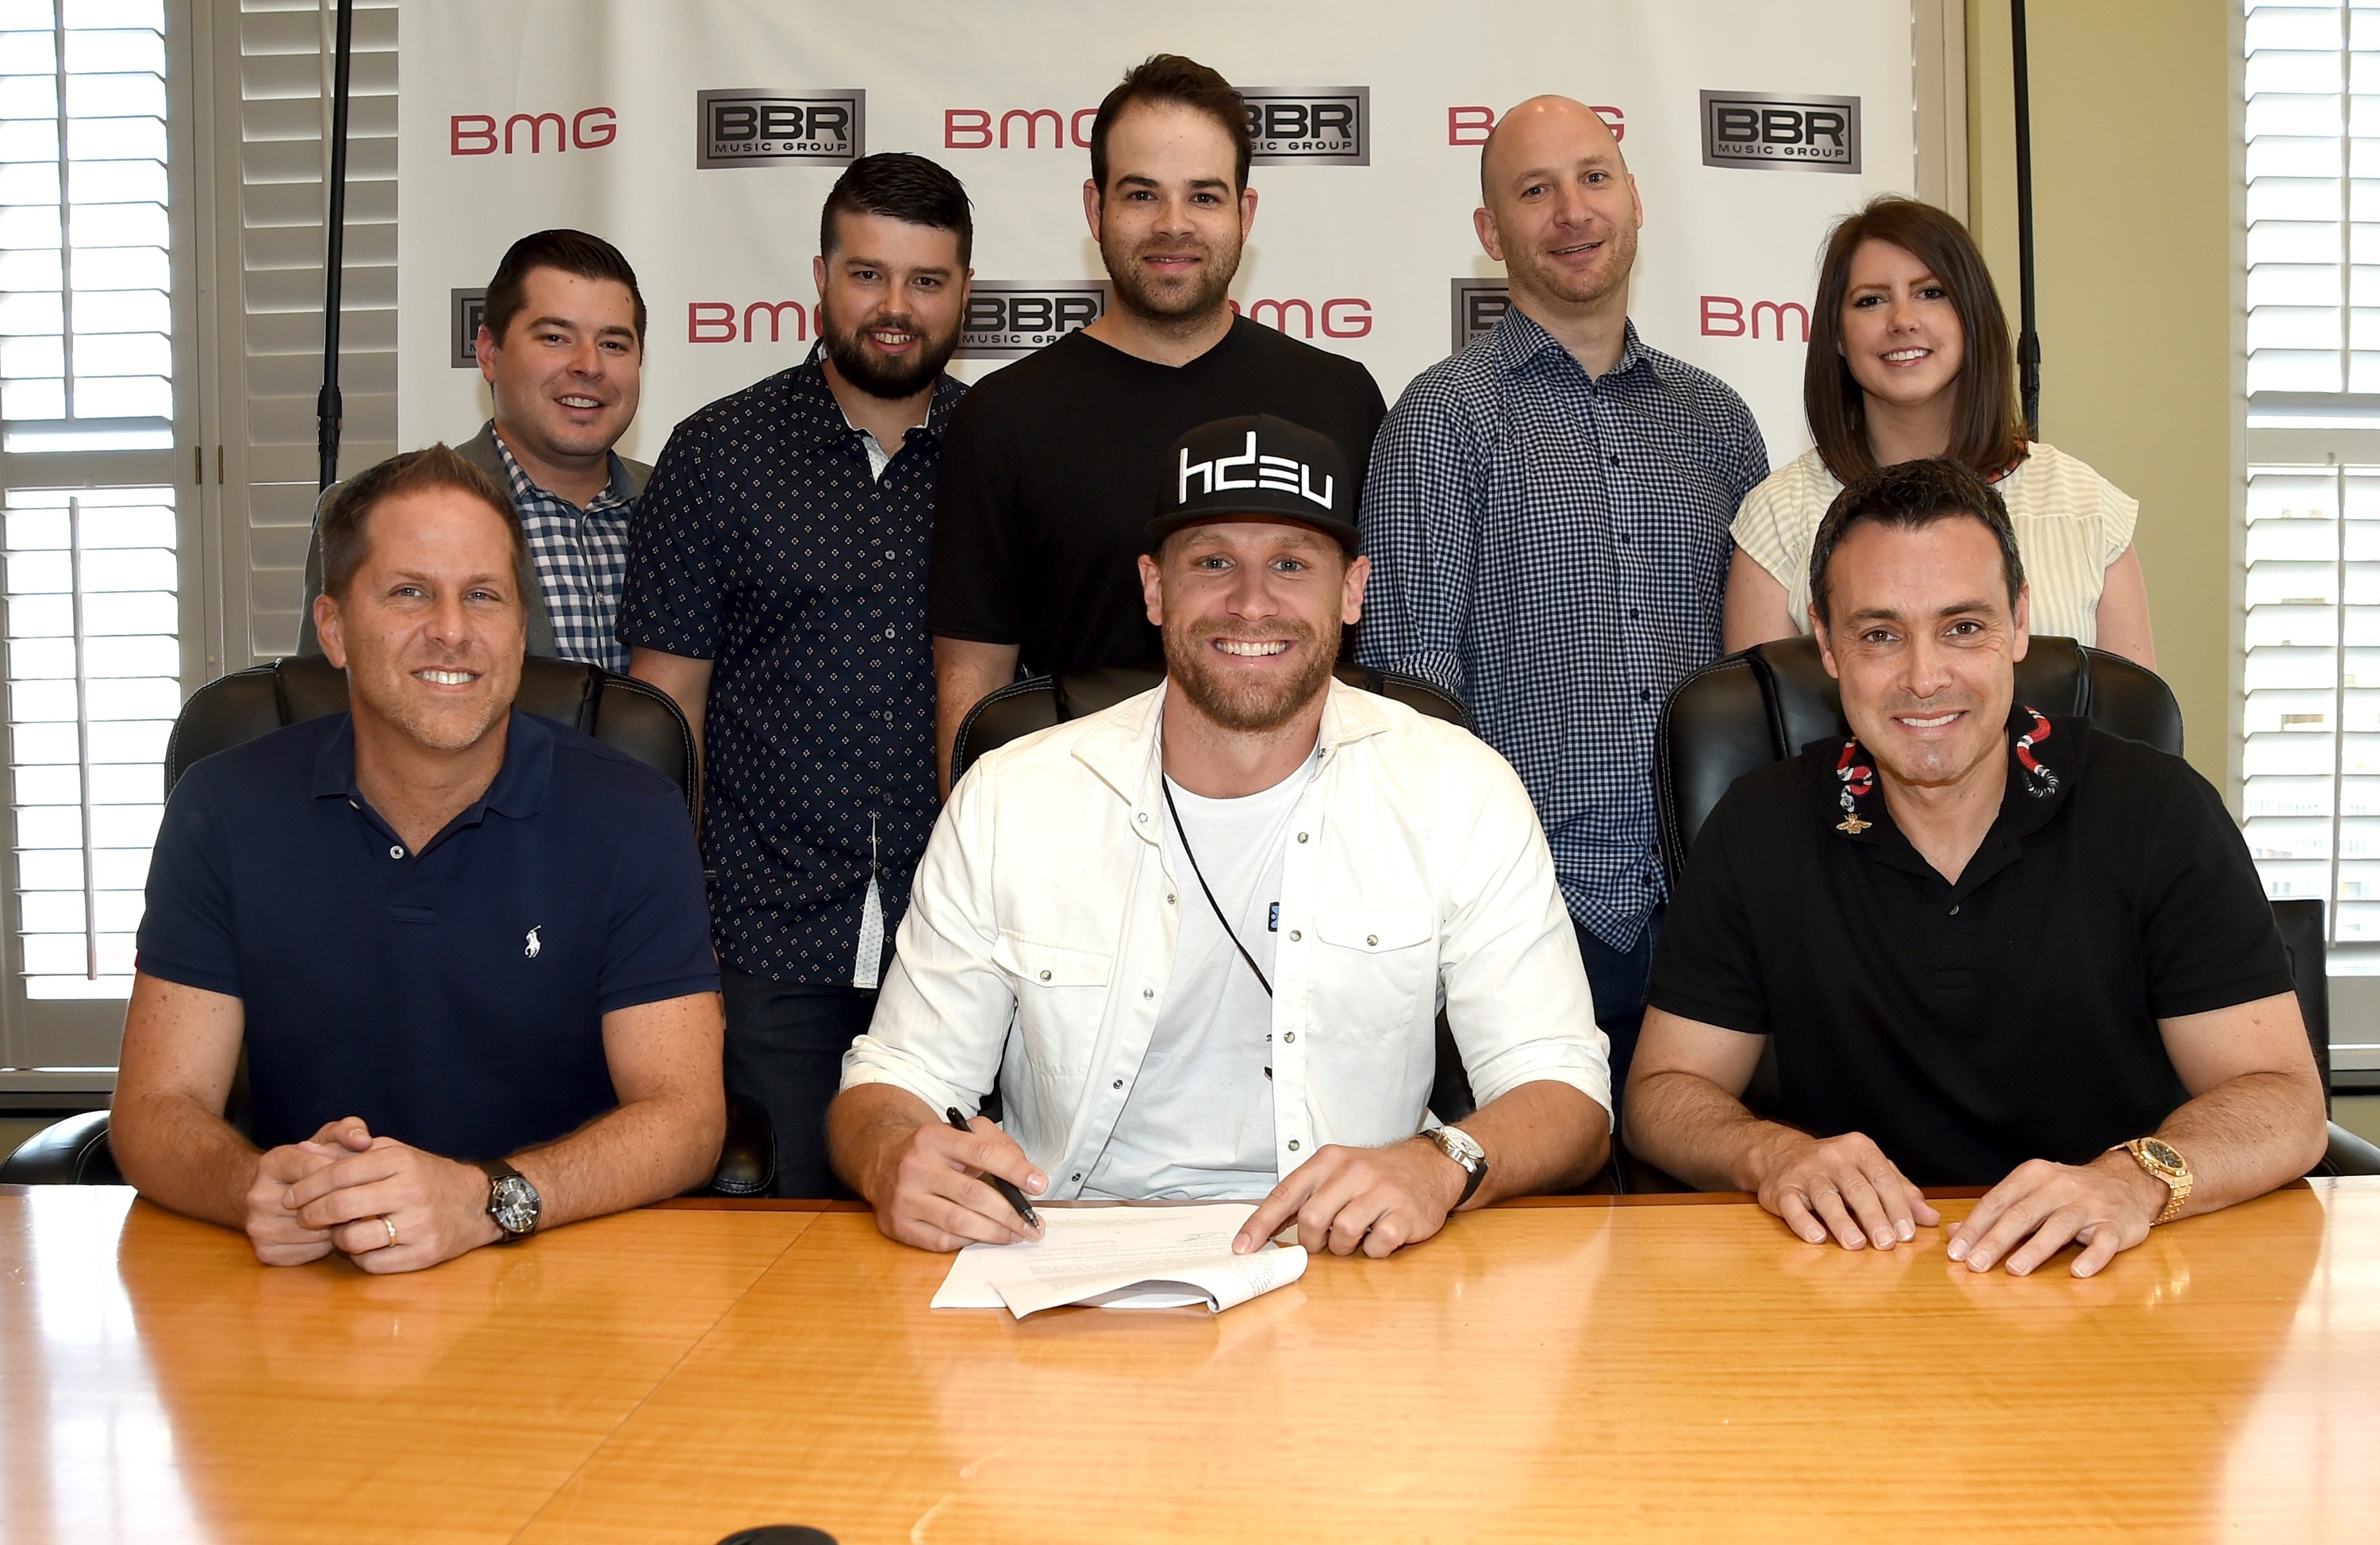 Photo - Back Row L-R: Colton McGee, Director, Legal and Financial Affairs BBR Music Group; Triple 8 Management's Eddie Kloesel, Bruce Kalmick and George Couri; and CAA's Meredith Jones; Photo - Front Row L-R: Jon Loba, EVP, BBR Music Group; Chase Rice; and Zach Katz, US Repertoire & Marketing, BMG; Photo Credit: Rick Diamond/Getty Images